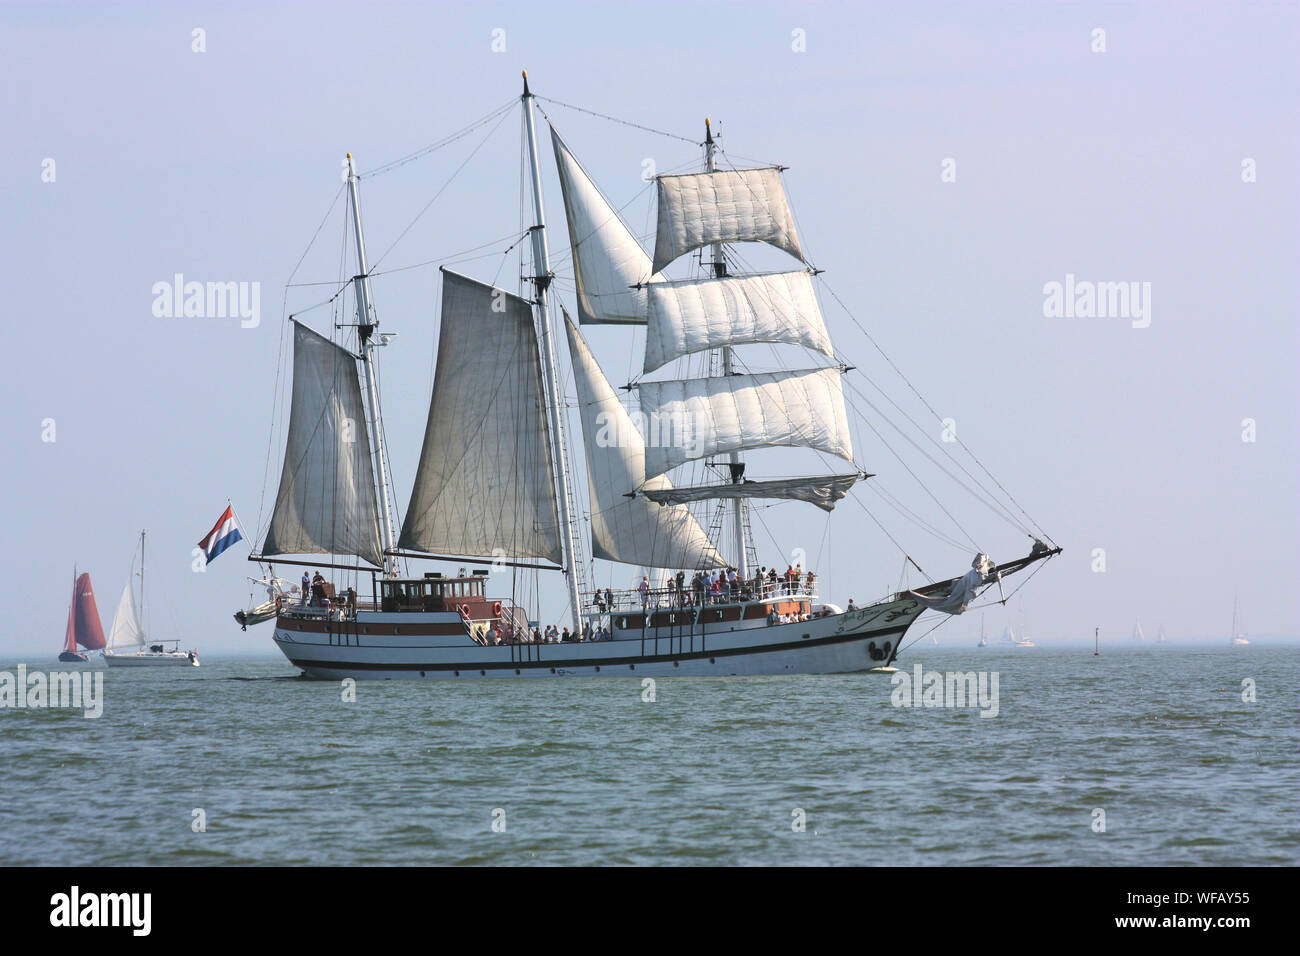 The beautiful scenery of traditional fisherman sailing ship when it is seen over the sea on Volendam waters in the summer. Stock Photo